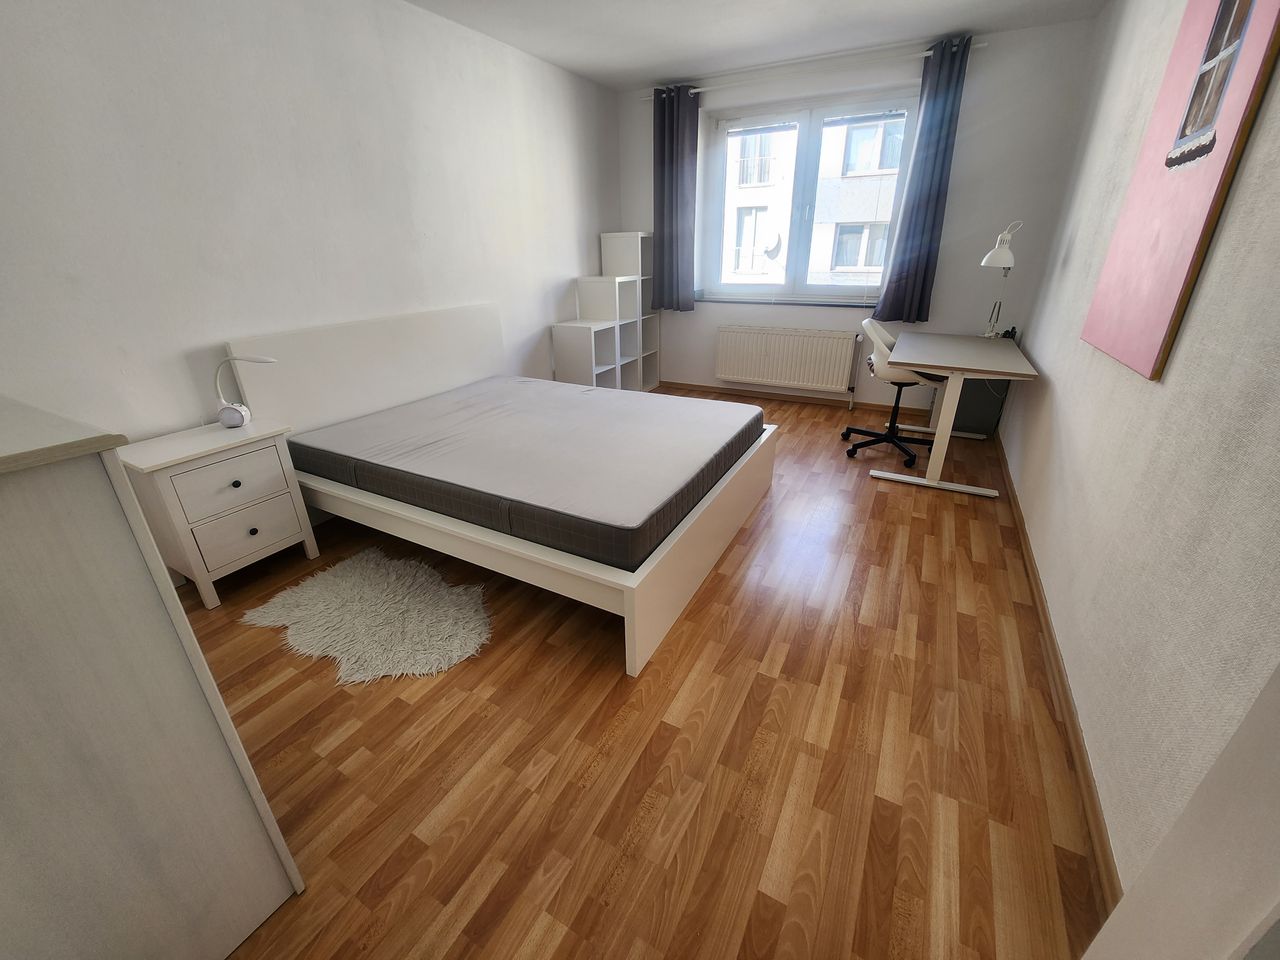 Düsseldorf City! Chic and bright apartment (50m ²) in the heart of the city!